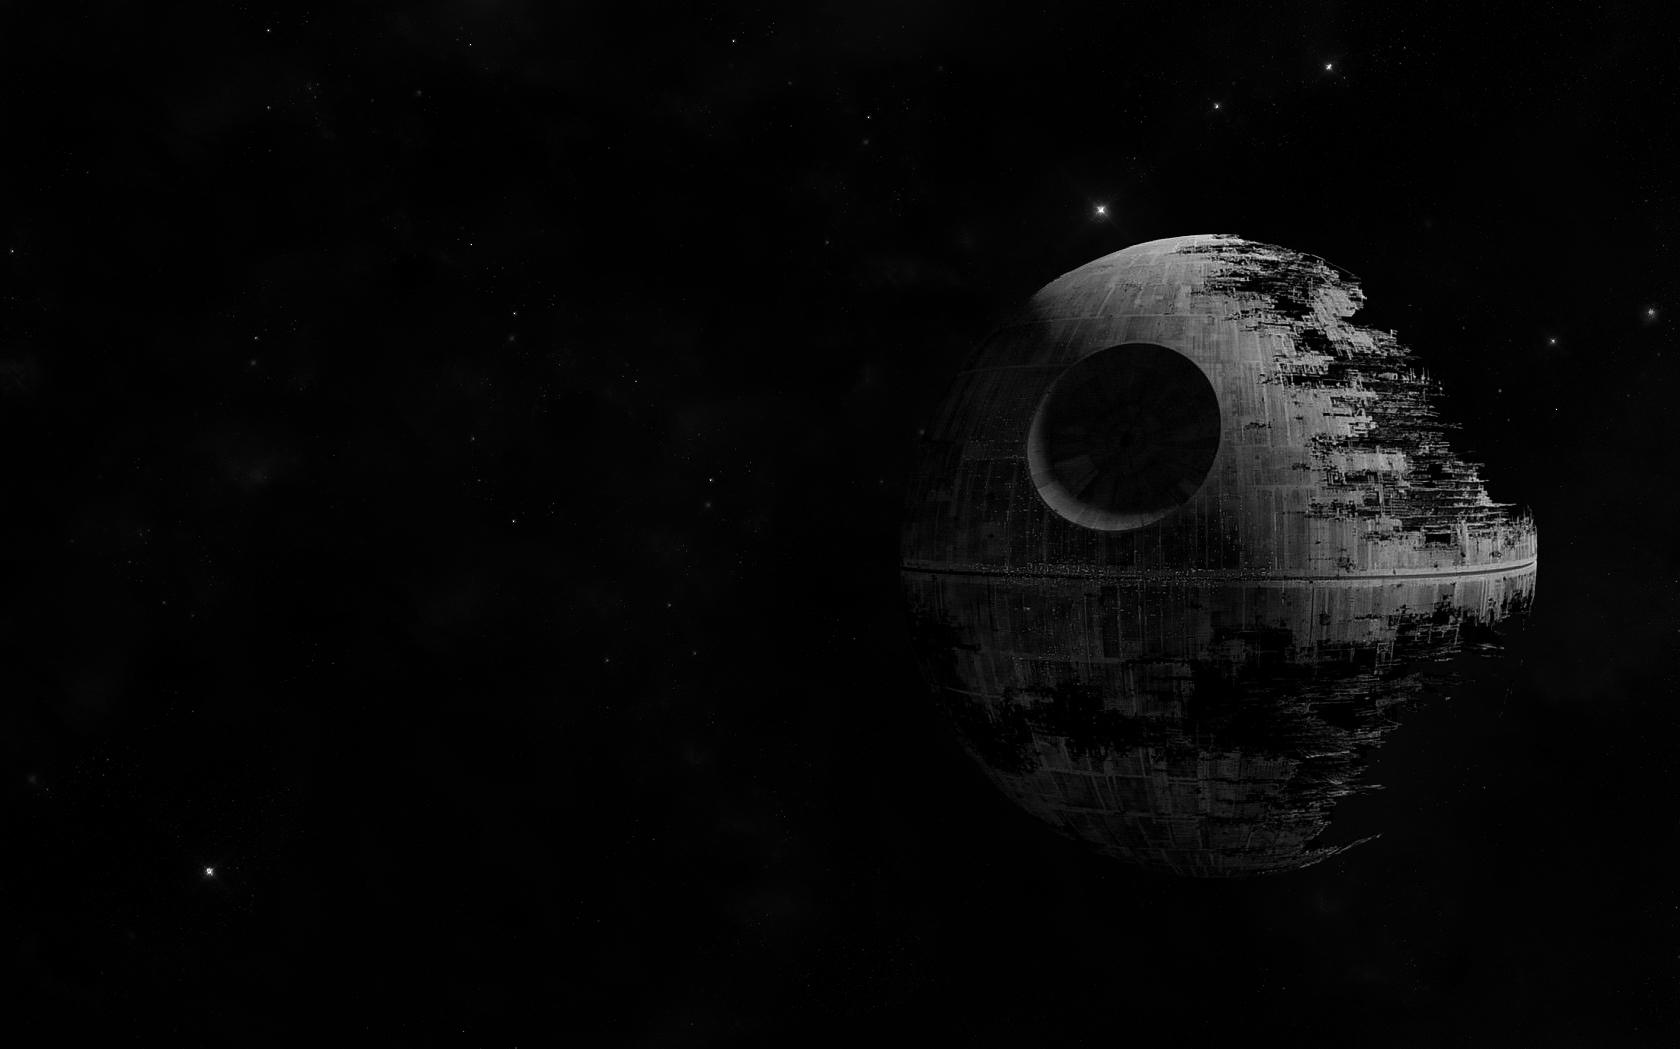 Death Star HD Wallpaper And Background